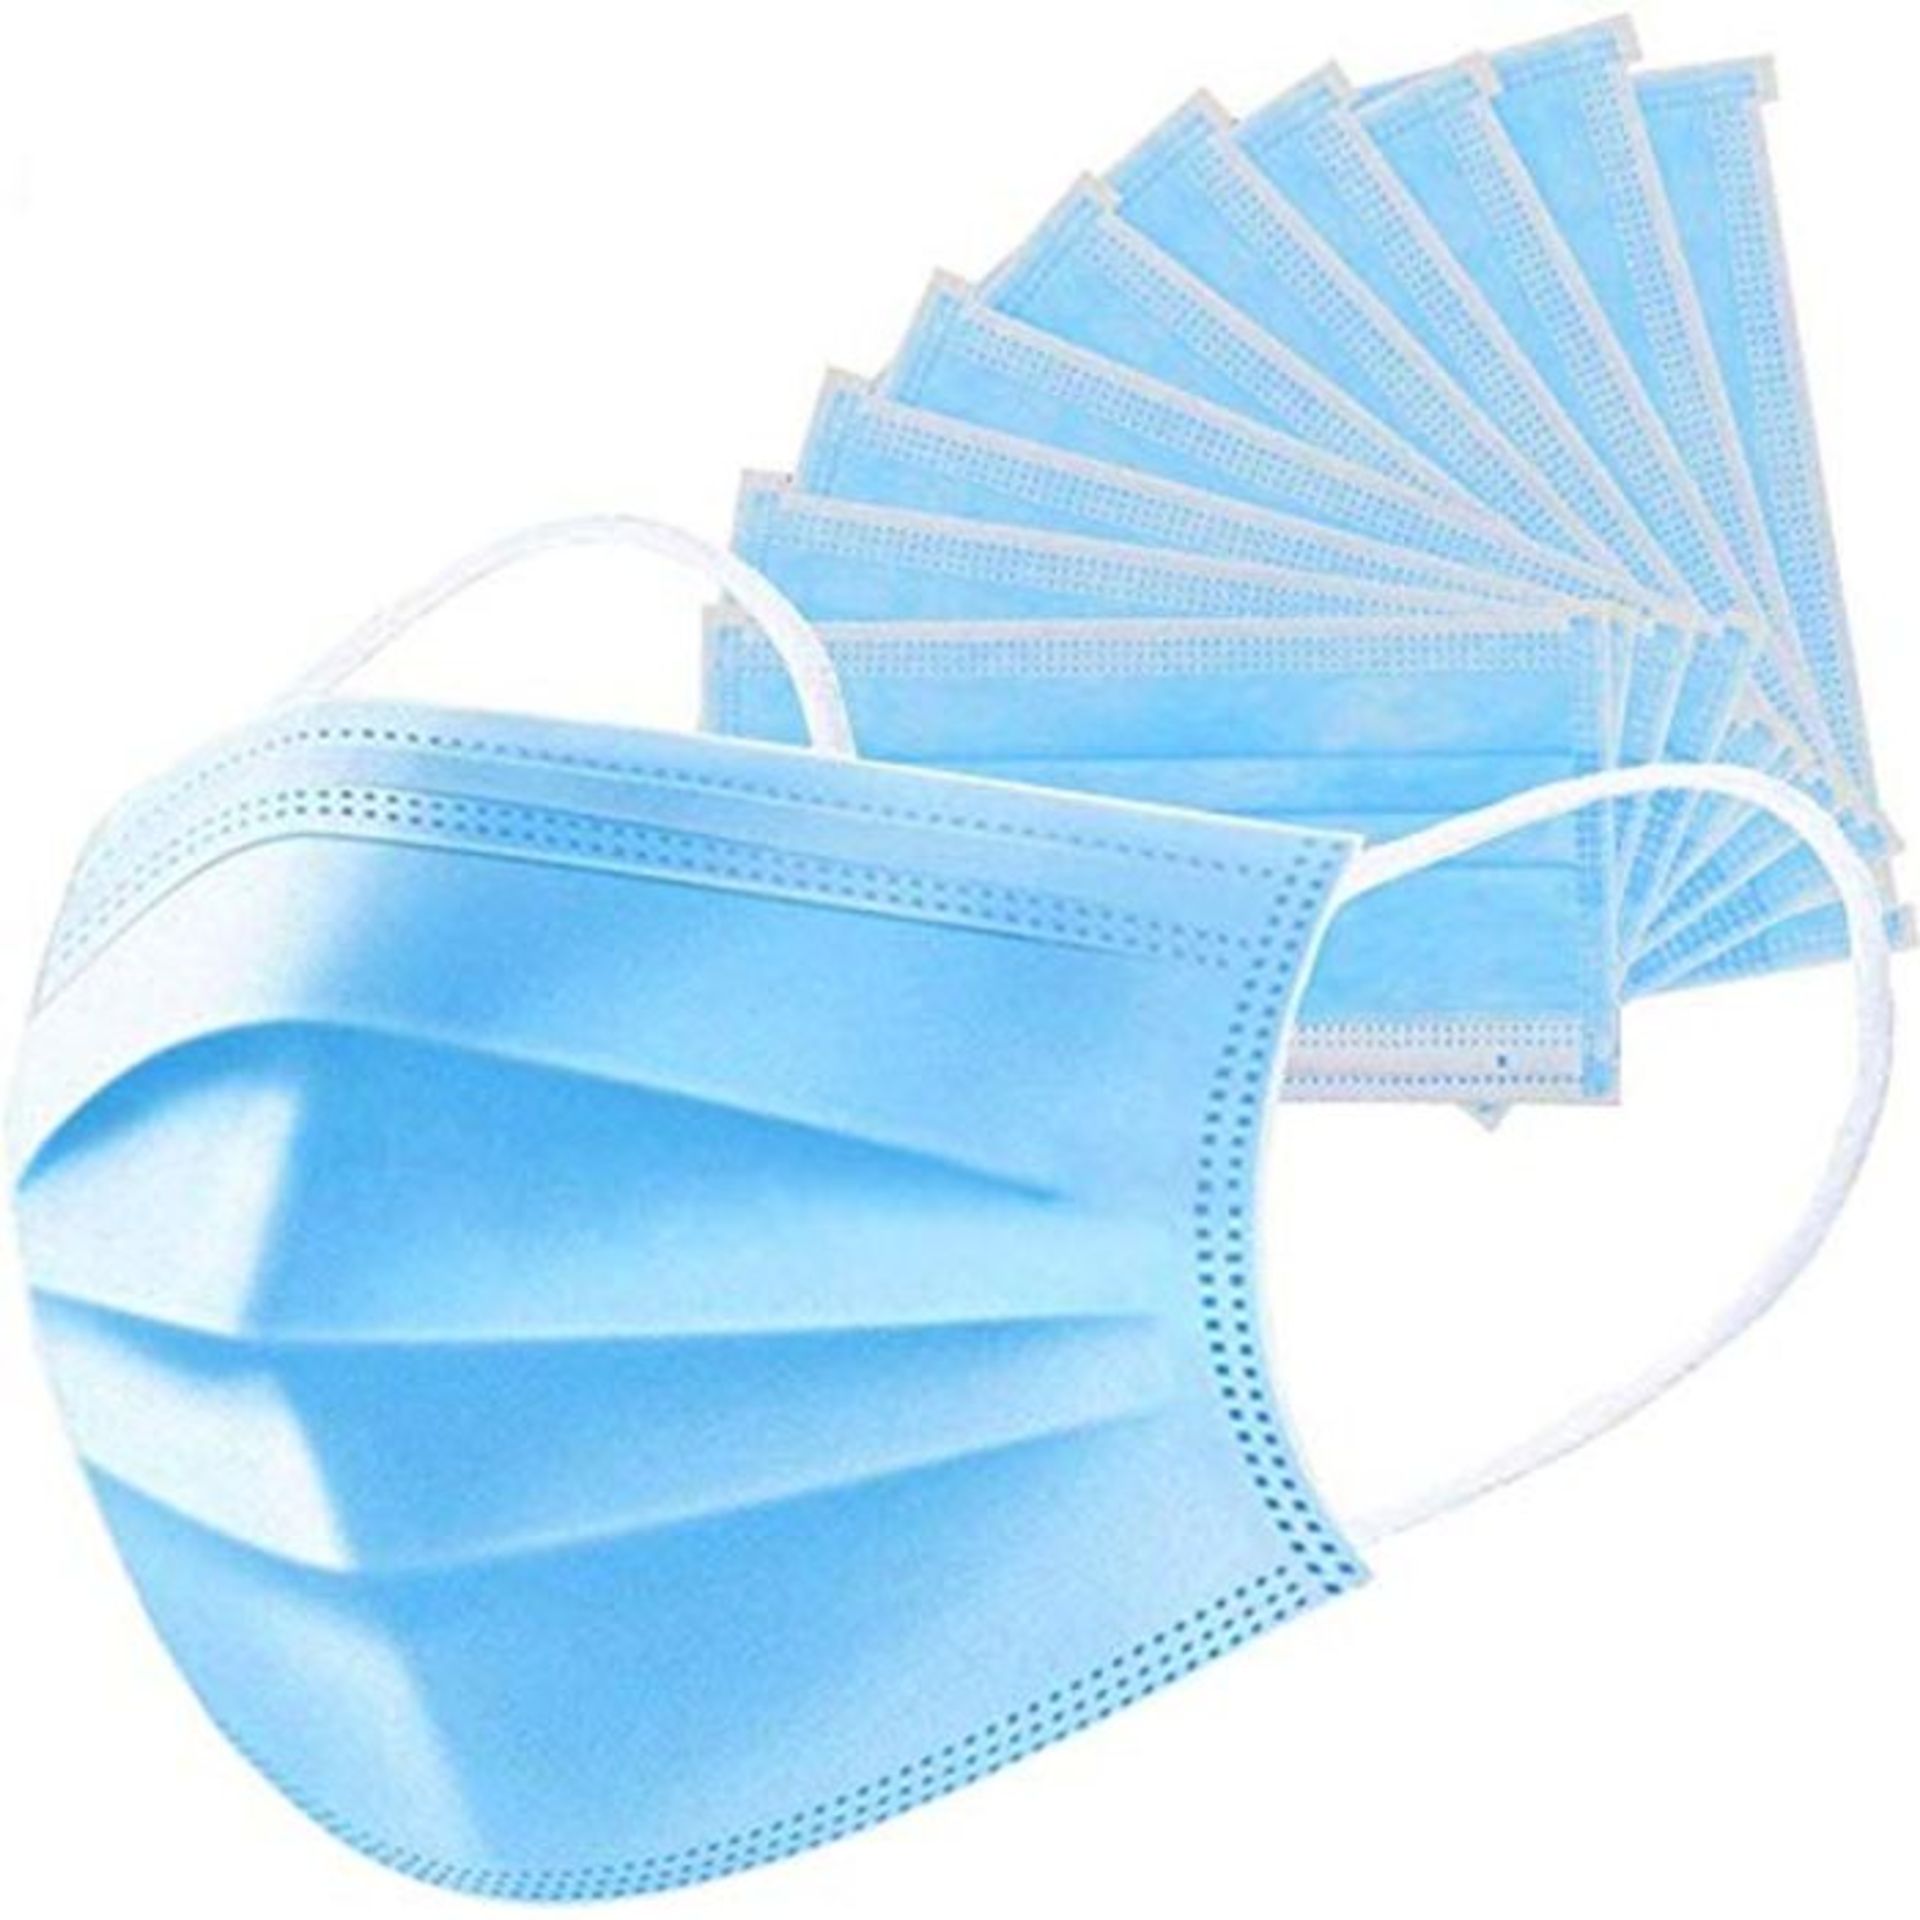 Shatchi disposable facial mask with ear loop, 3 lint, blue, 100 pieces